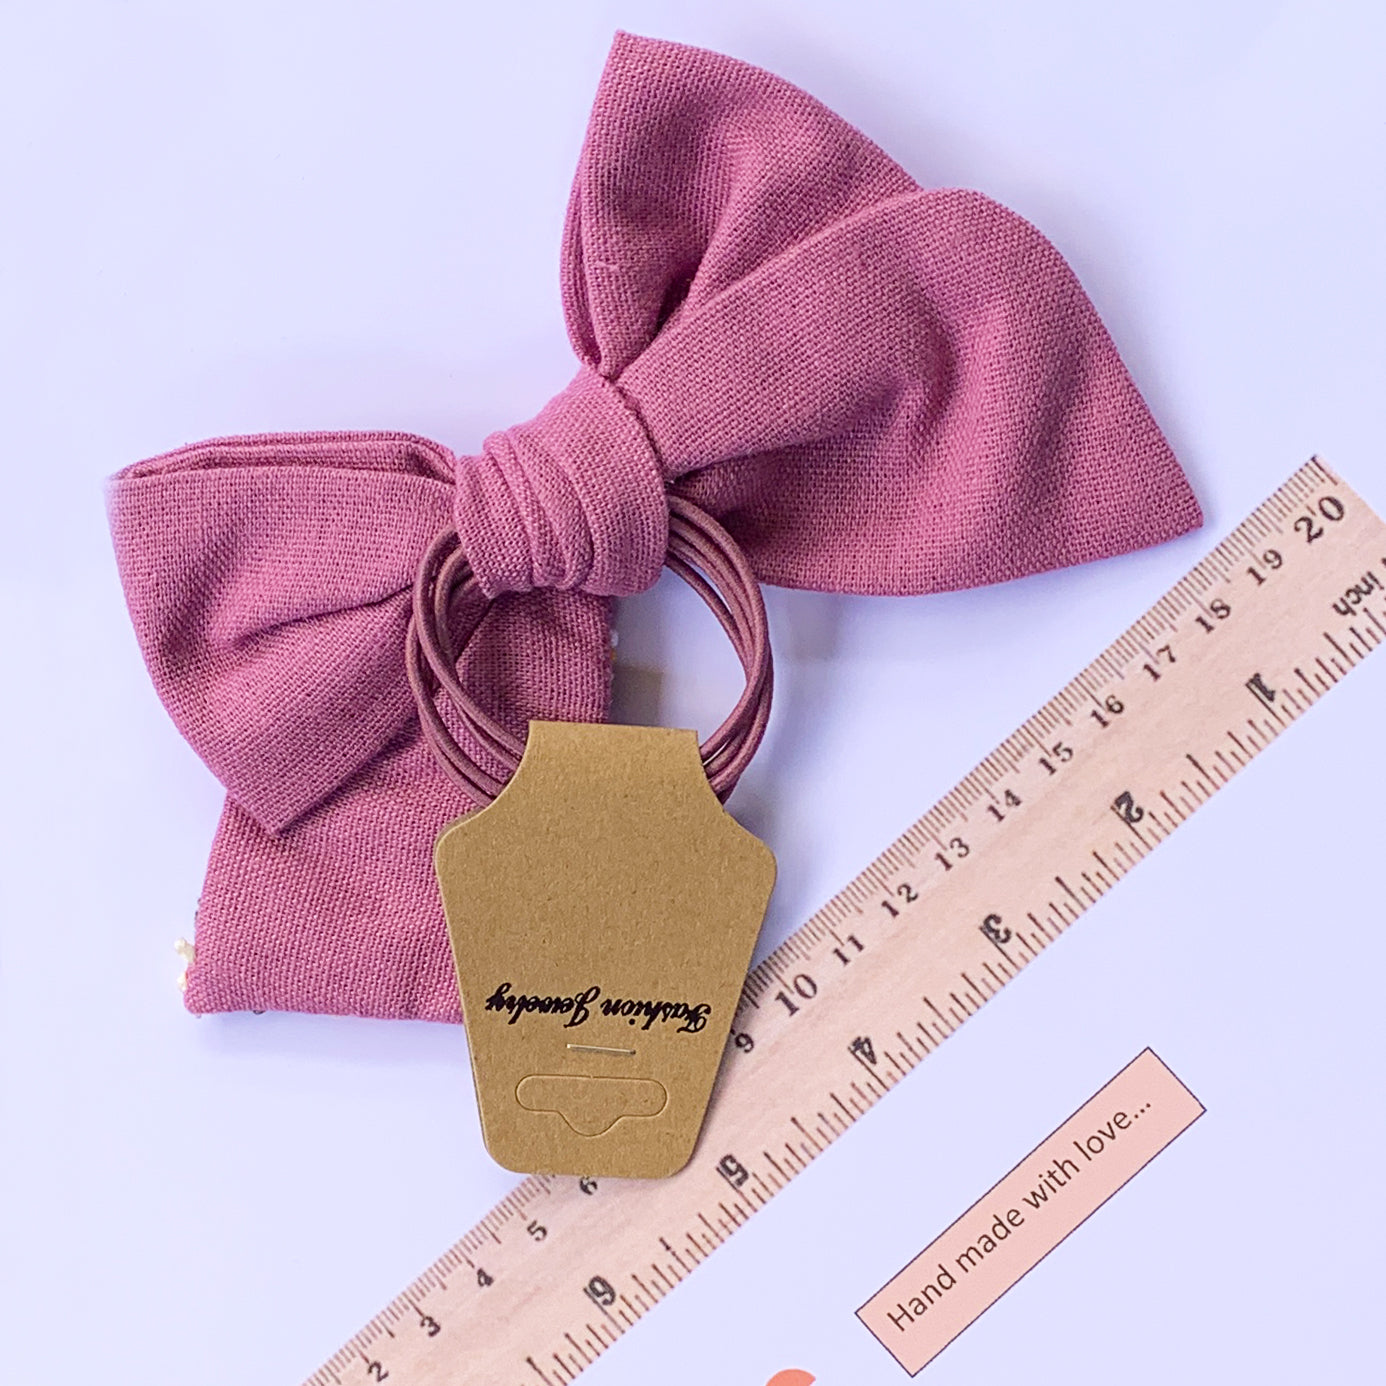 Linen Embroidered Hair Bow.